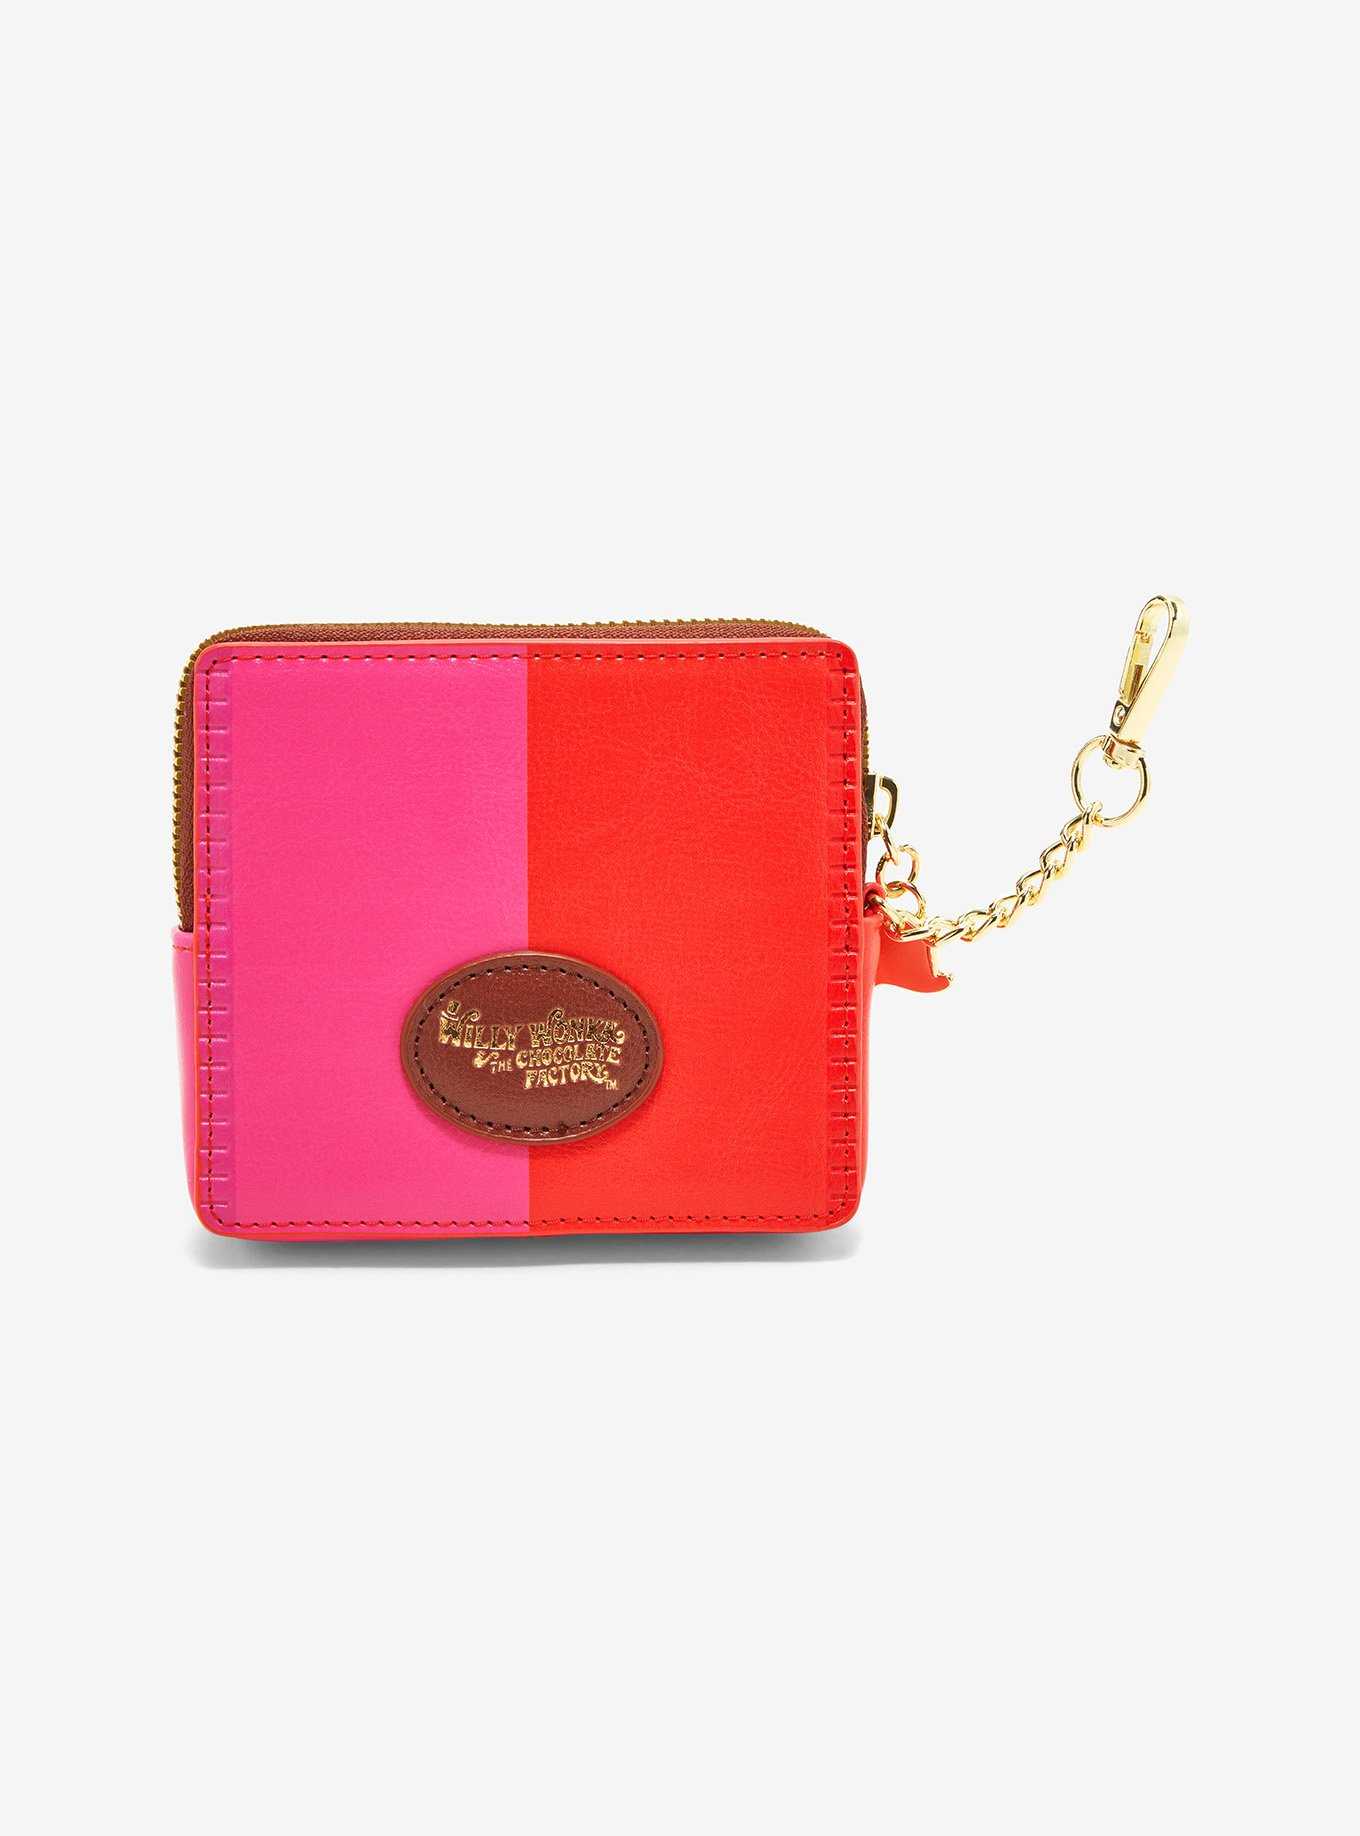 Willy Wonka & The Chocolate Factory Wonka Bar Coin Purse, , hi-res